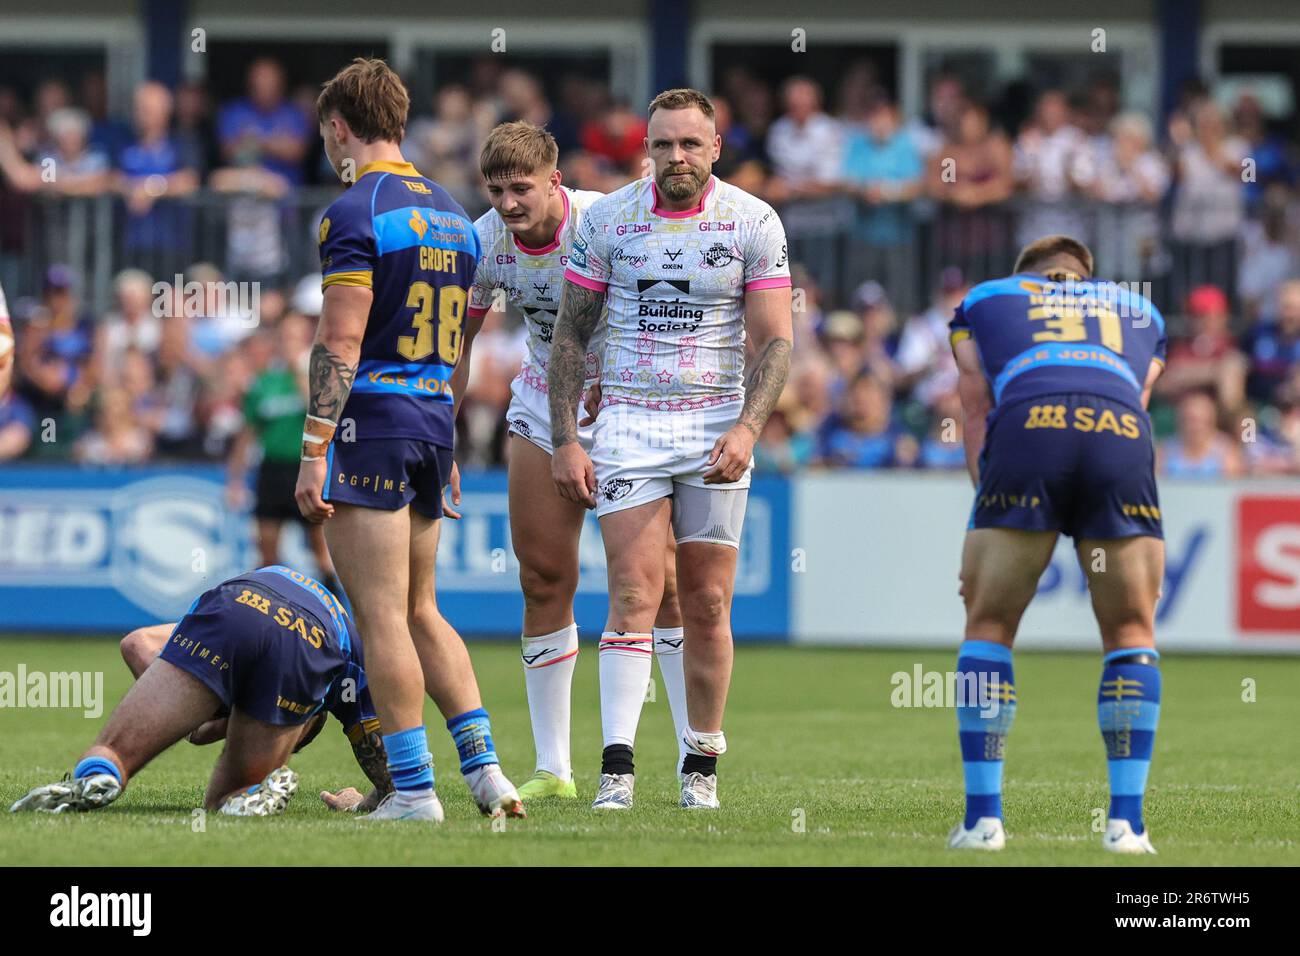 A dejected Blake Austin #6 of Leeds Rhinos after dropping the ball during the Betfred Super League Round 15 match Wakefield Trinity vs Leeds Rhinos at The Be Well Support Stadium, Wakefield,